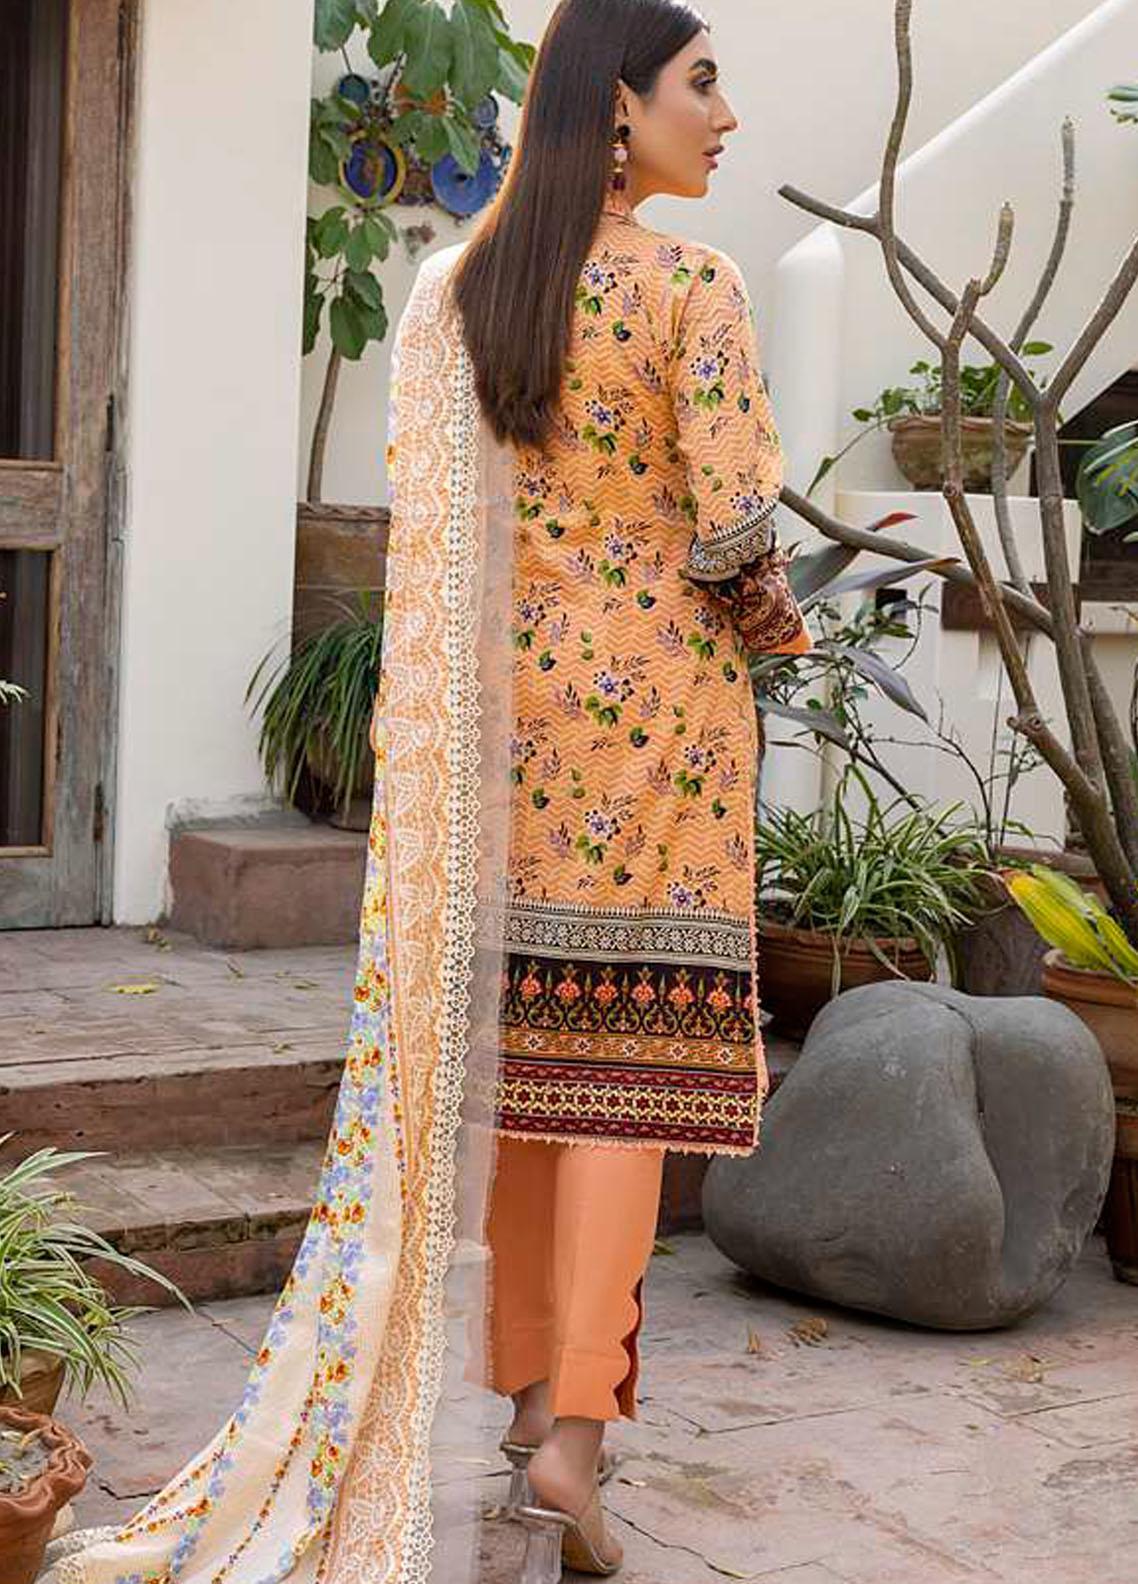 Monsoon Bahar By Al Zohaib Printed Lawn Suits Unstitched 3 Piece - 1C - Summer Collection